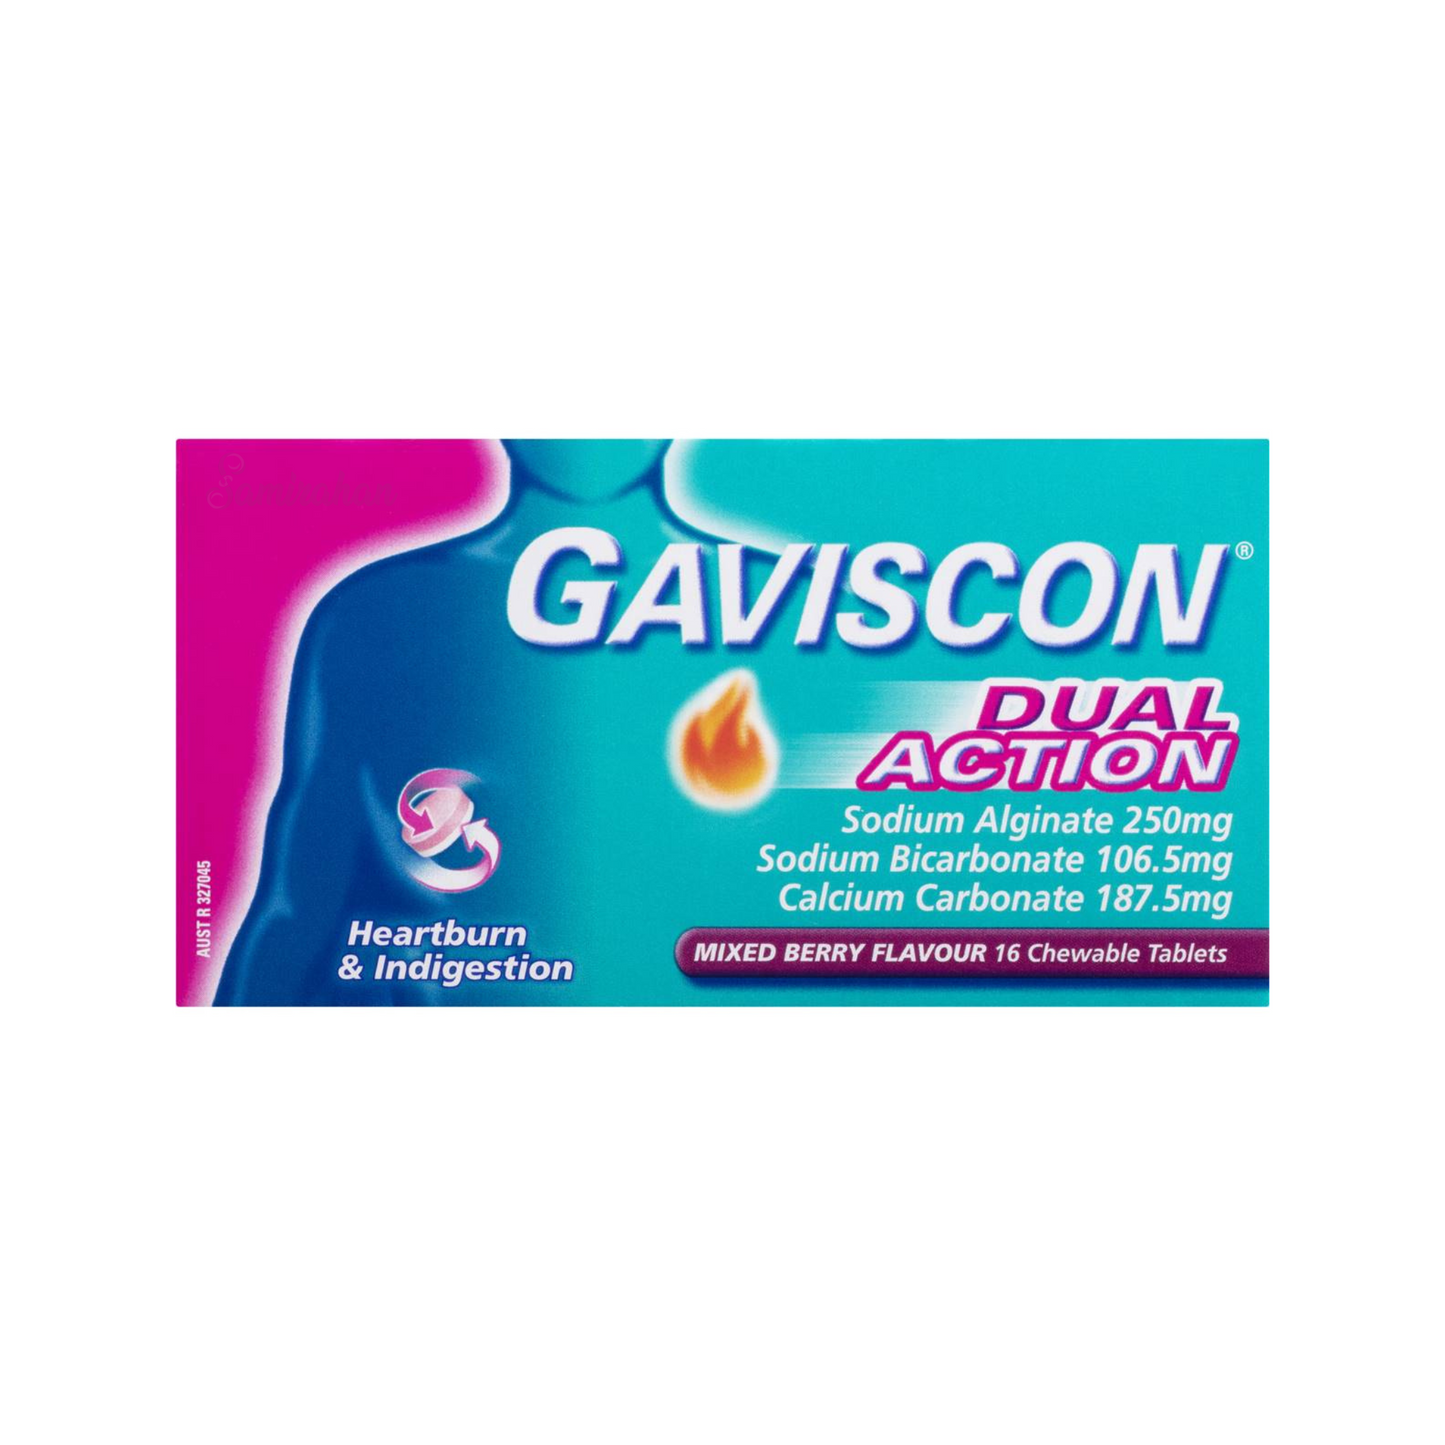 Gaviscon Dual Action Relief Mixed Berry is a dual-acting formula for heartburn & indigestion. These Chewable Tablets helps relieve gastric problem. Best imported foreign Australian Aussie genuine authentic premium quality real healthy gas stomach ache cure medicine cheap price in Dhaka Chittagong Sylhet Bangladesh.